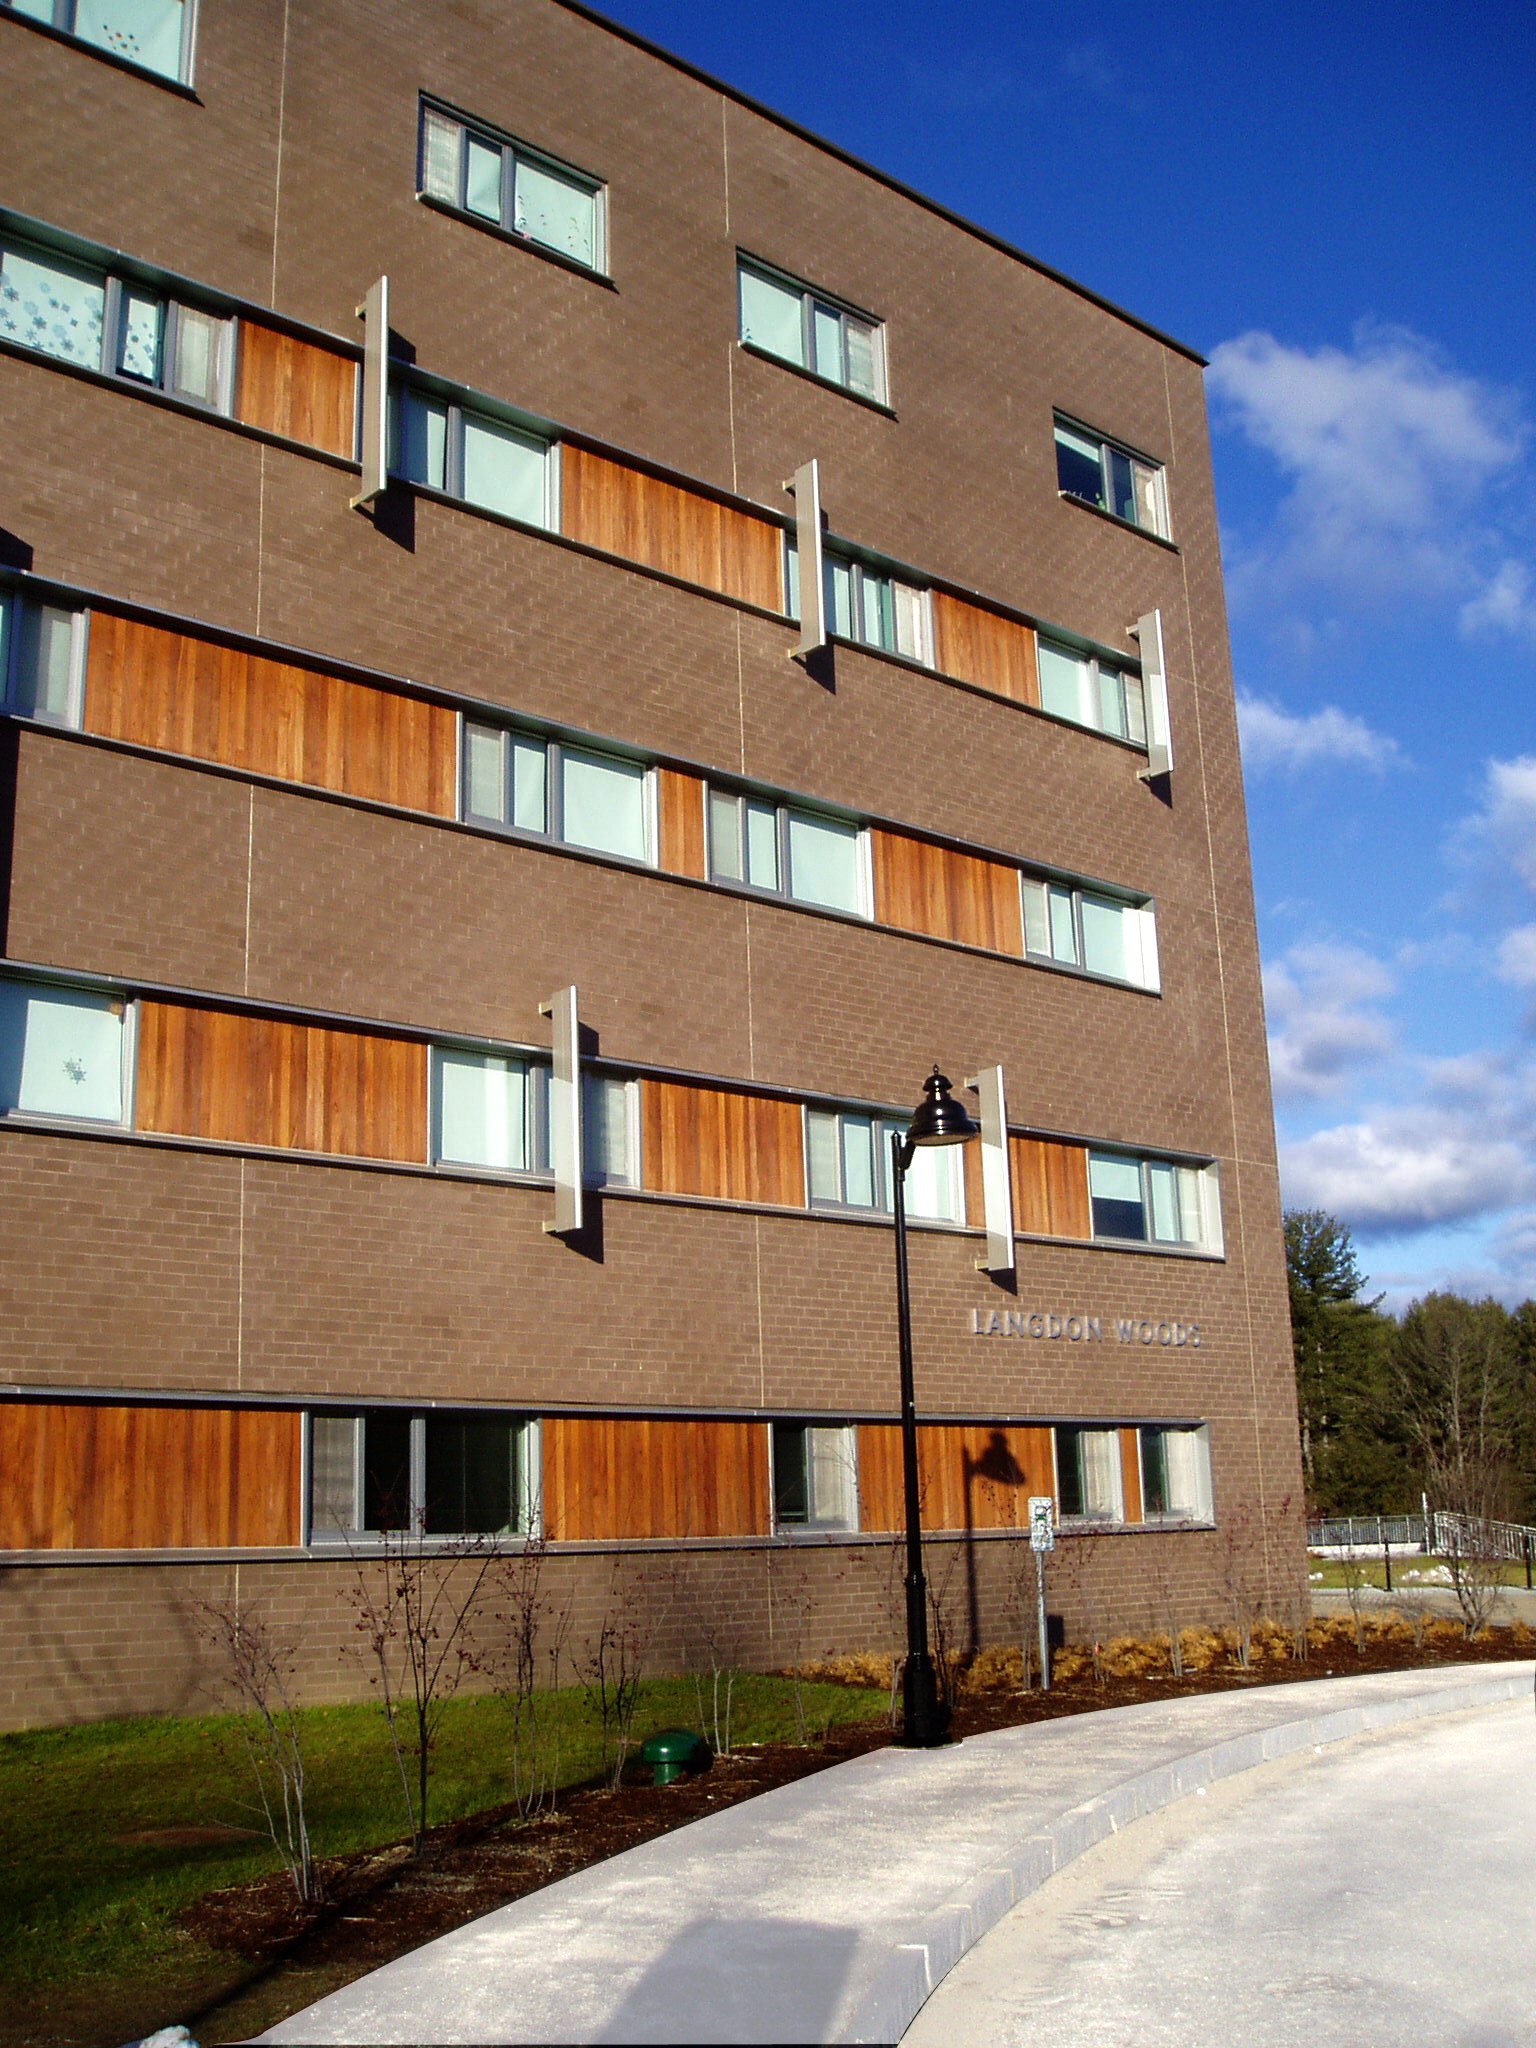 First LEED Gold Certified Residence Hall in New Hampshire. Plymouth State University, Langdon Woods